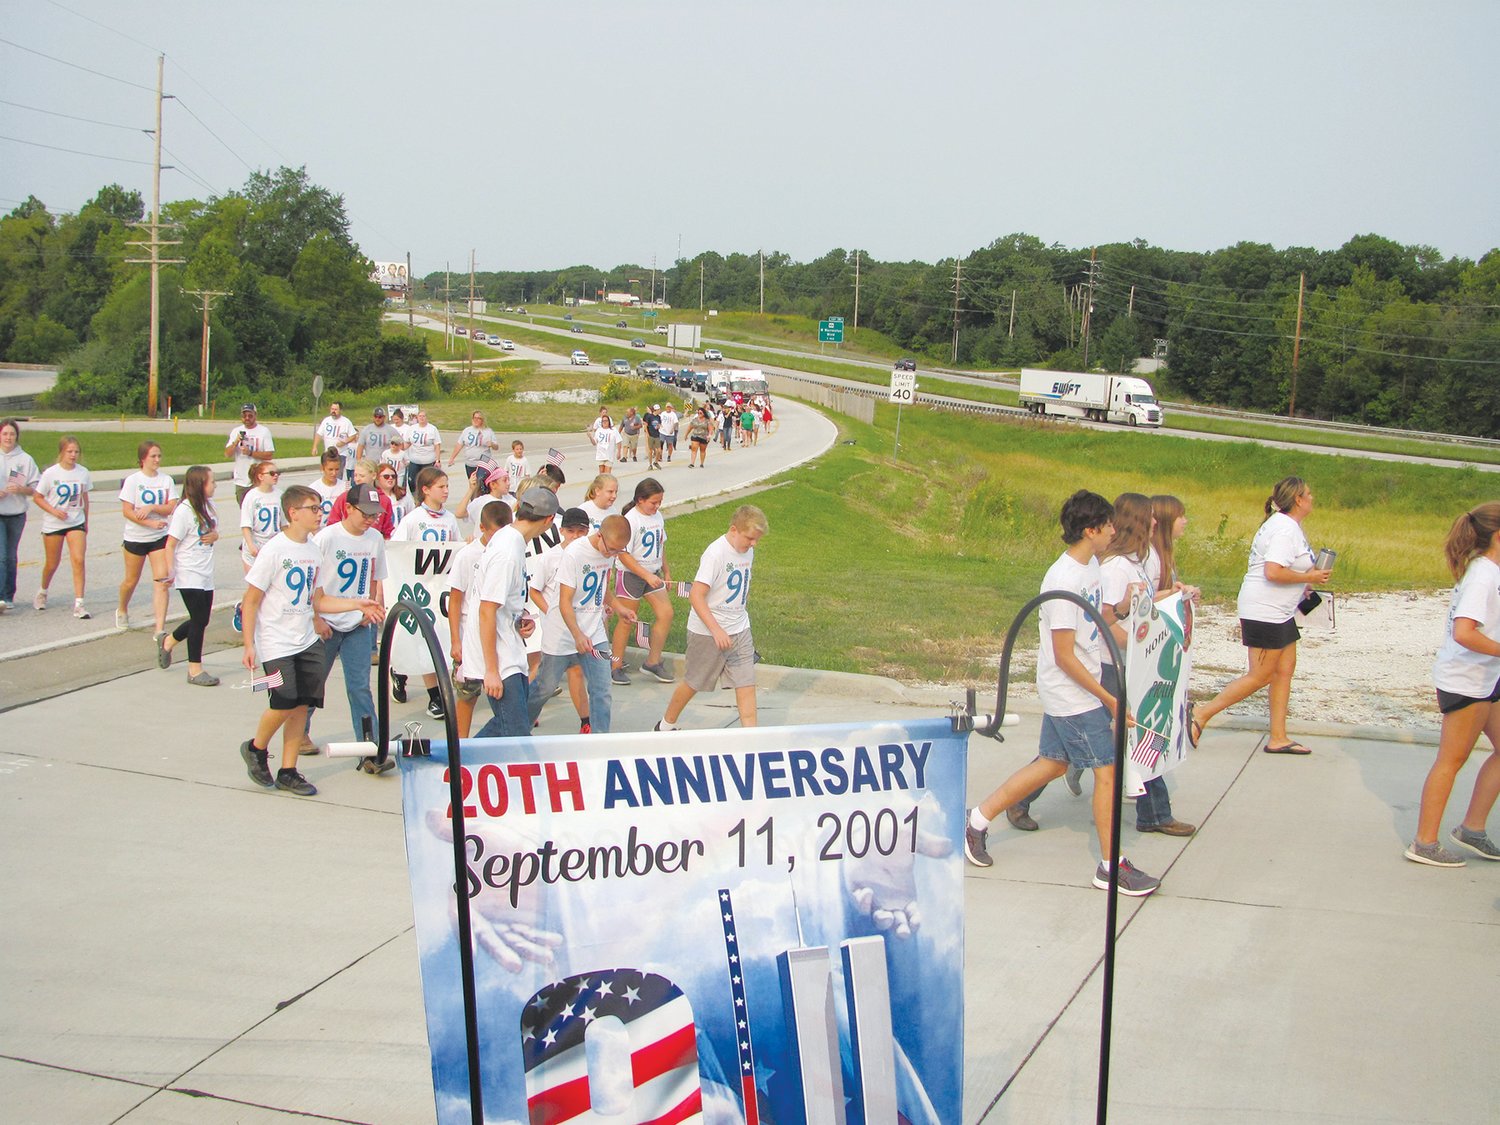 20TH ANNIVERSARY OF 9/11 — 4-H members, their families and members of the community walk to the Warren County Tribute to Veterans Memorial in Warrenton as part of a ceremony to mark the 20th anniversary of the 9/11 terrorist attacks.